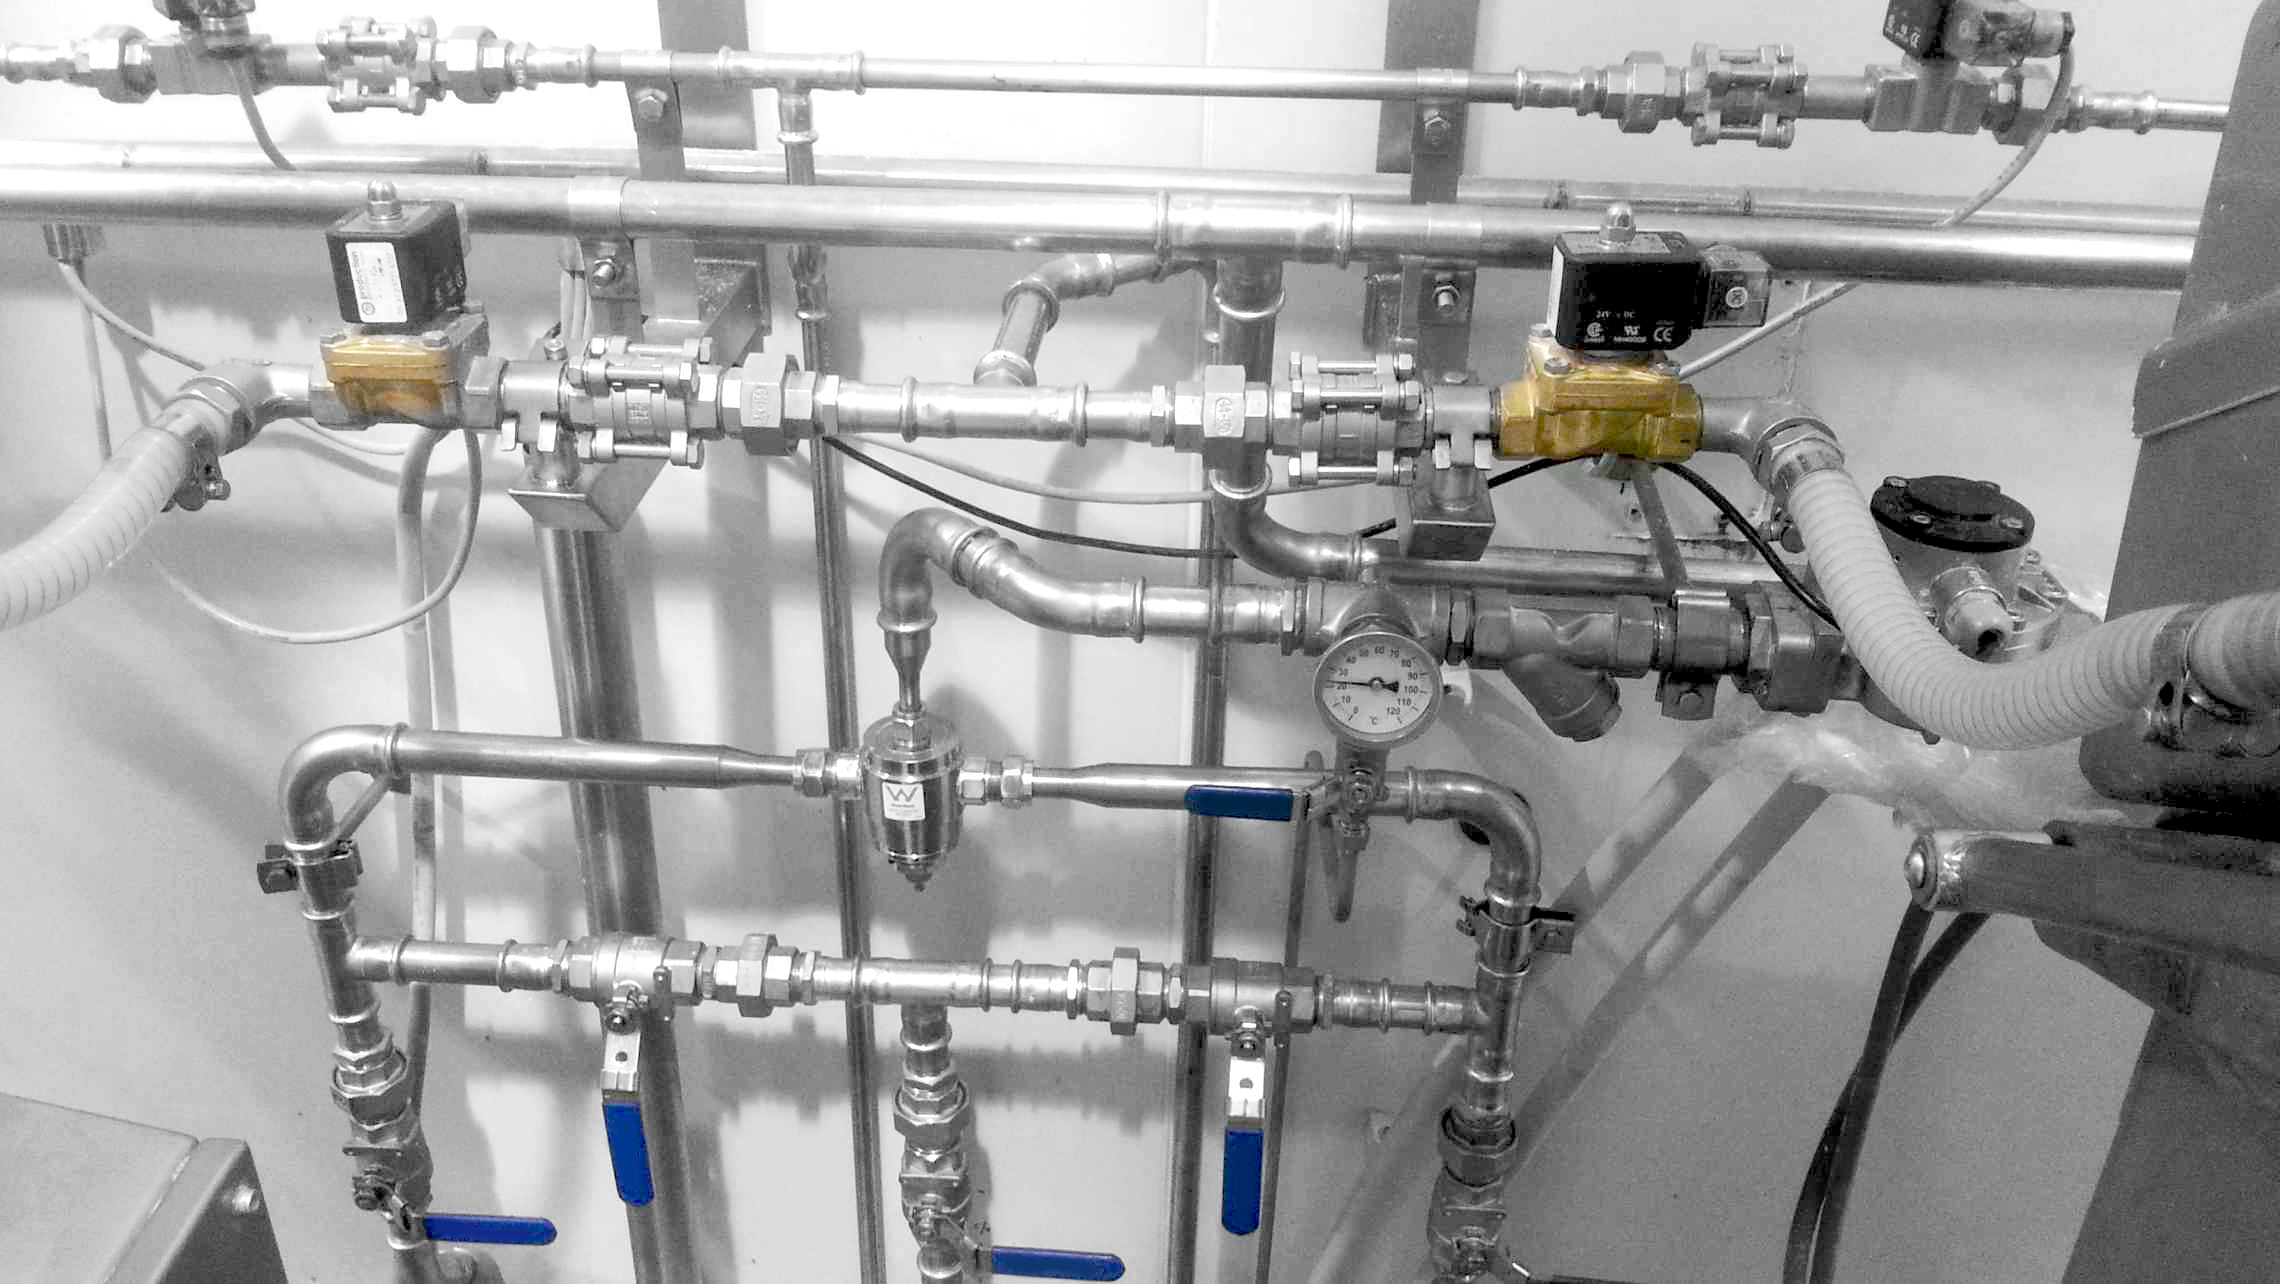 Stainless steel pipe and fittings in a pharmaceutical application